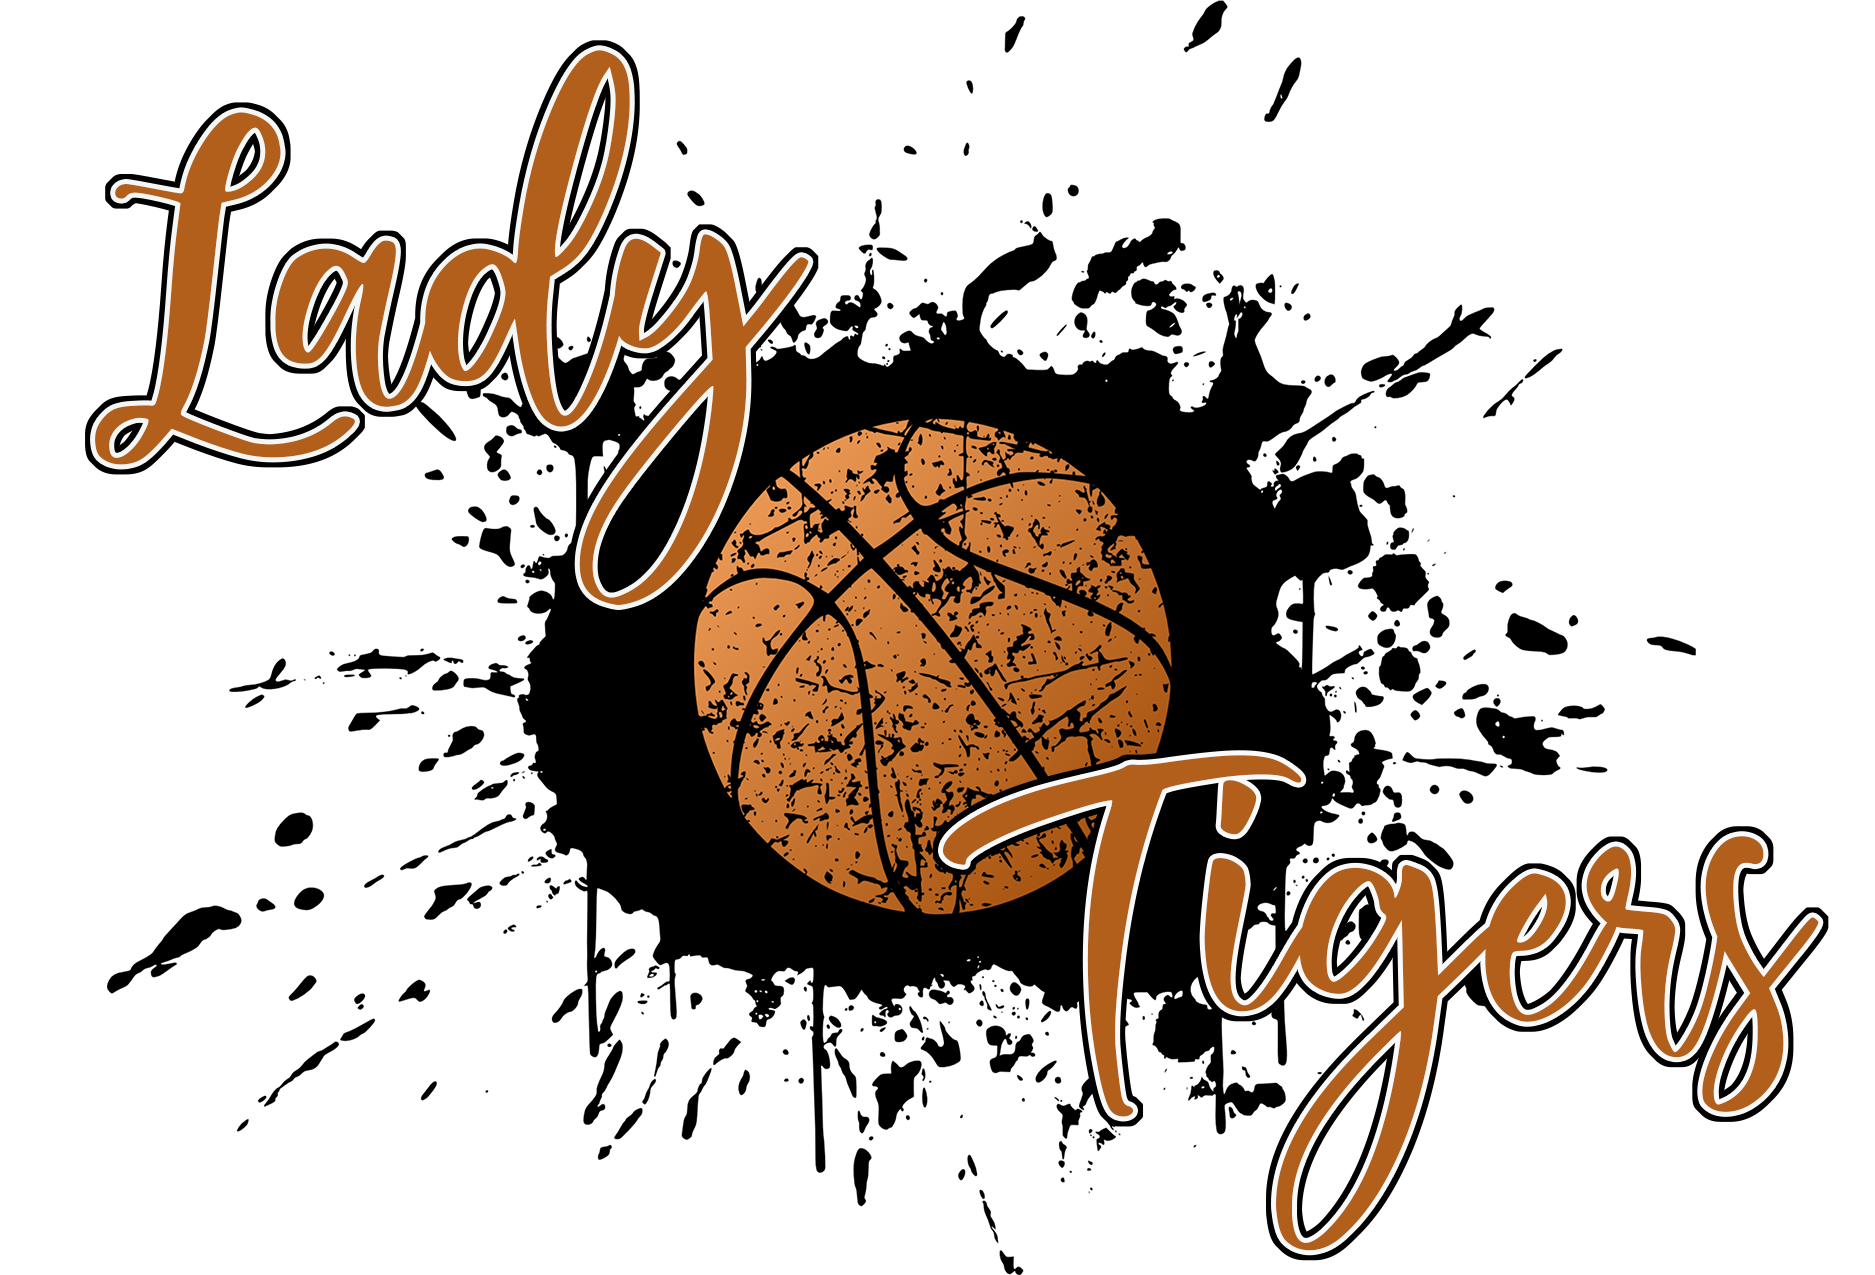 lady tigers graphic